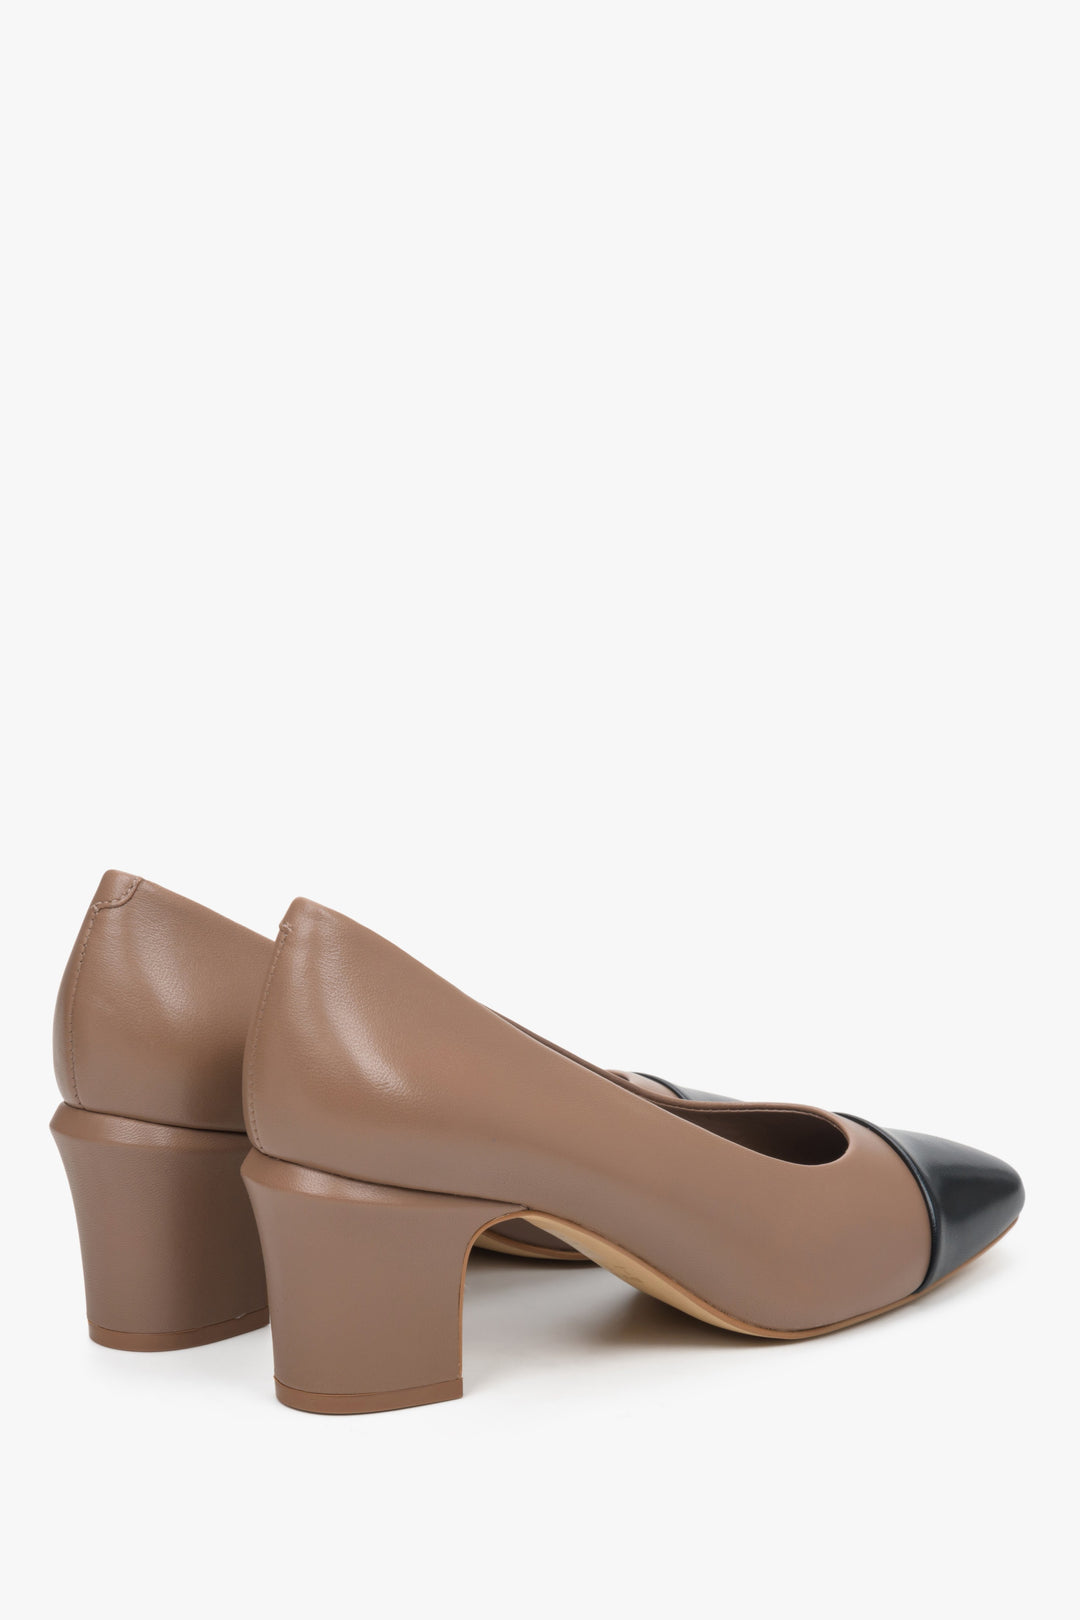 Leather, women's brown and black pumps with a square heel by Estro - close-up of the heel and the side line of the shoe.